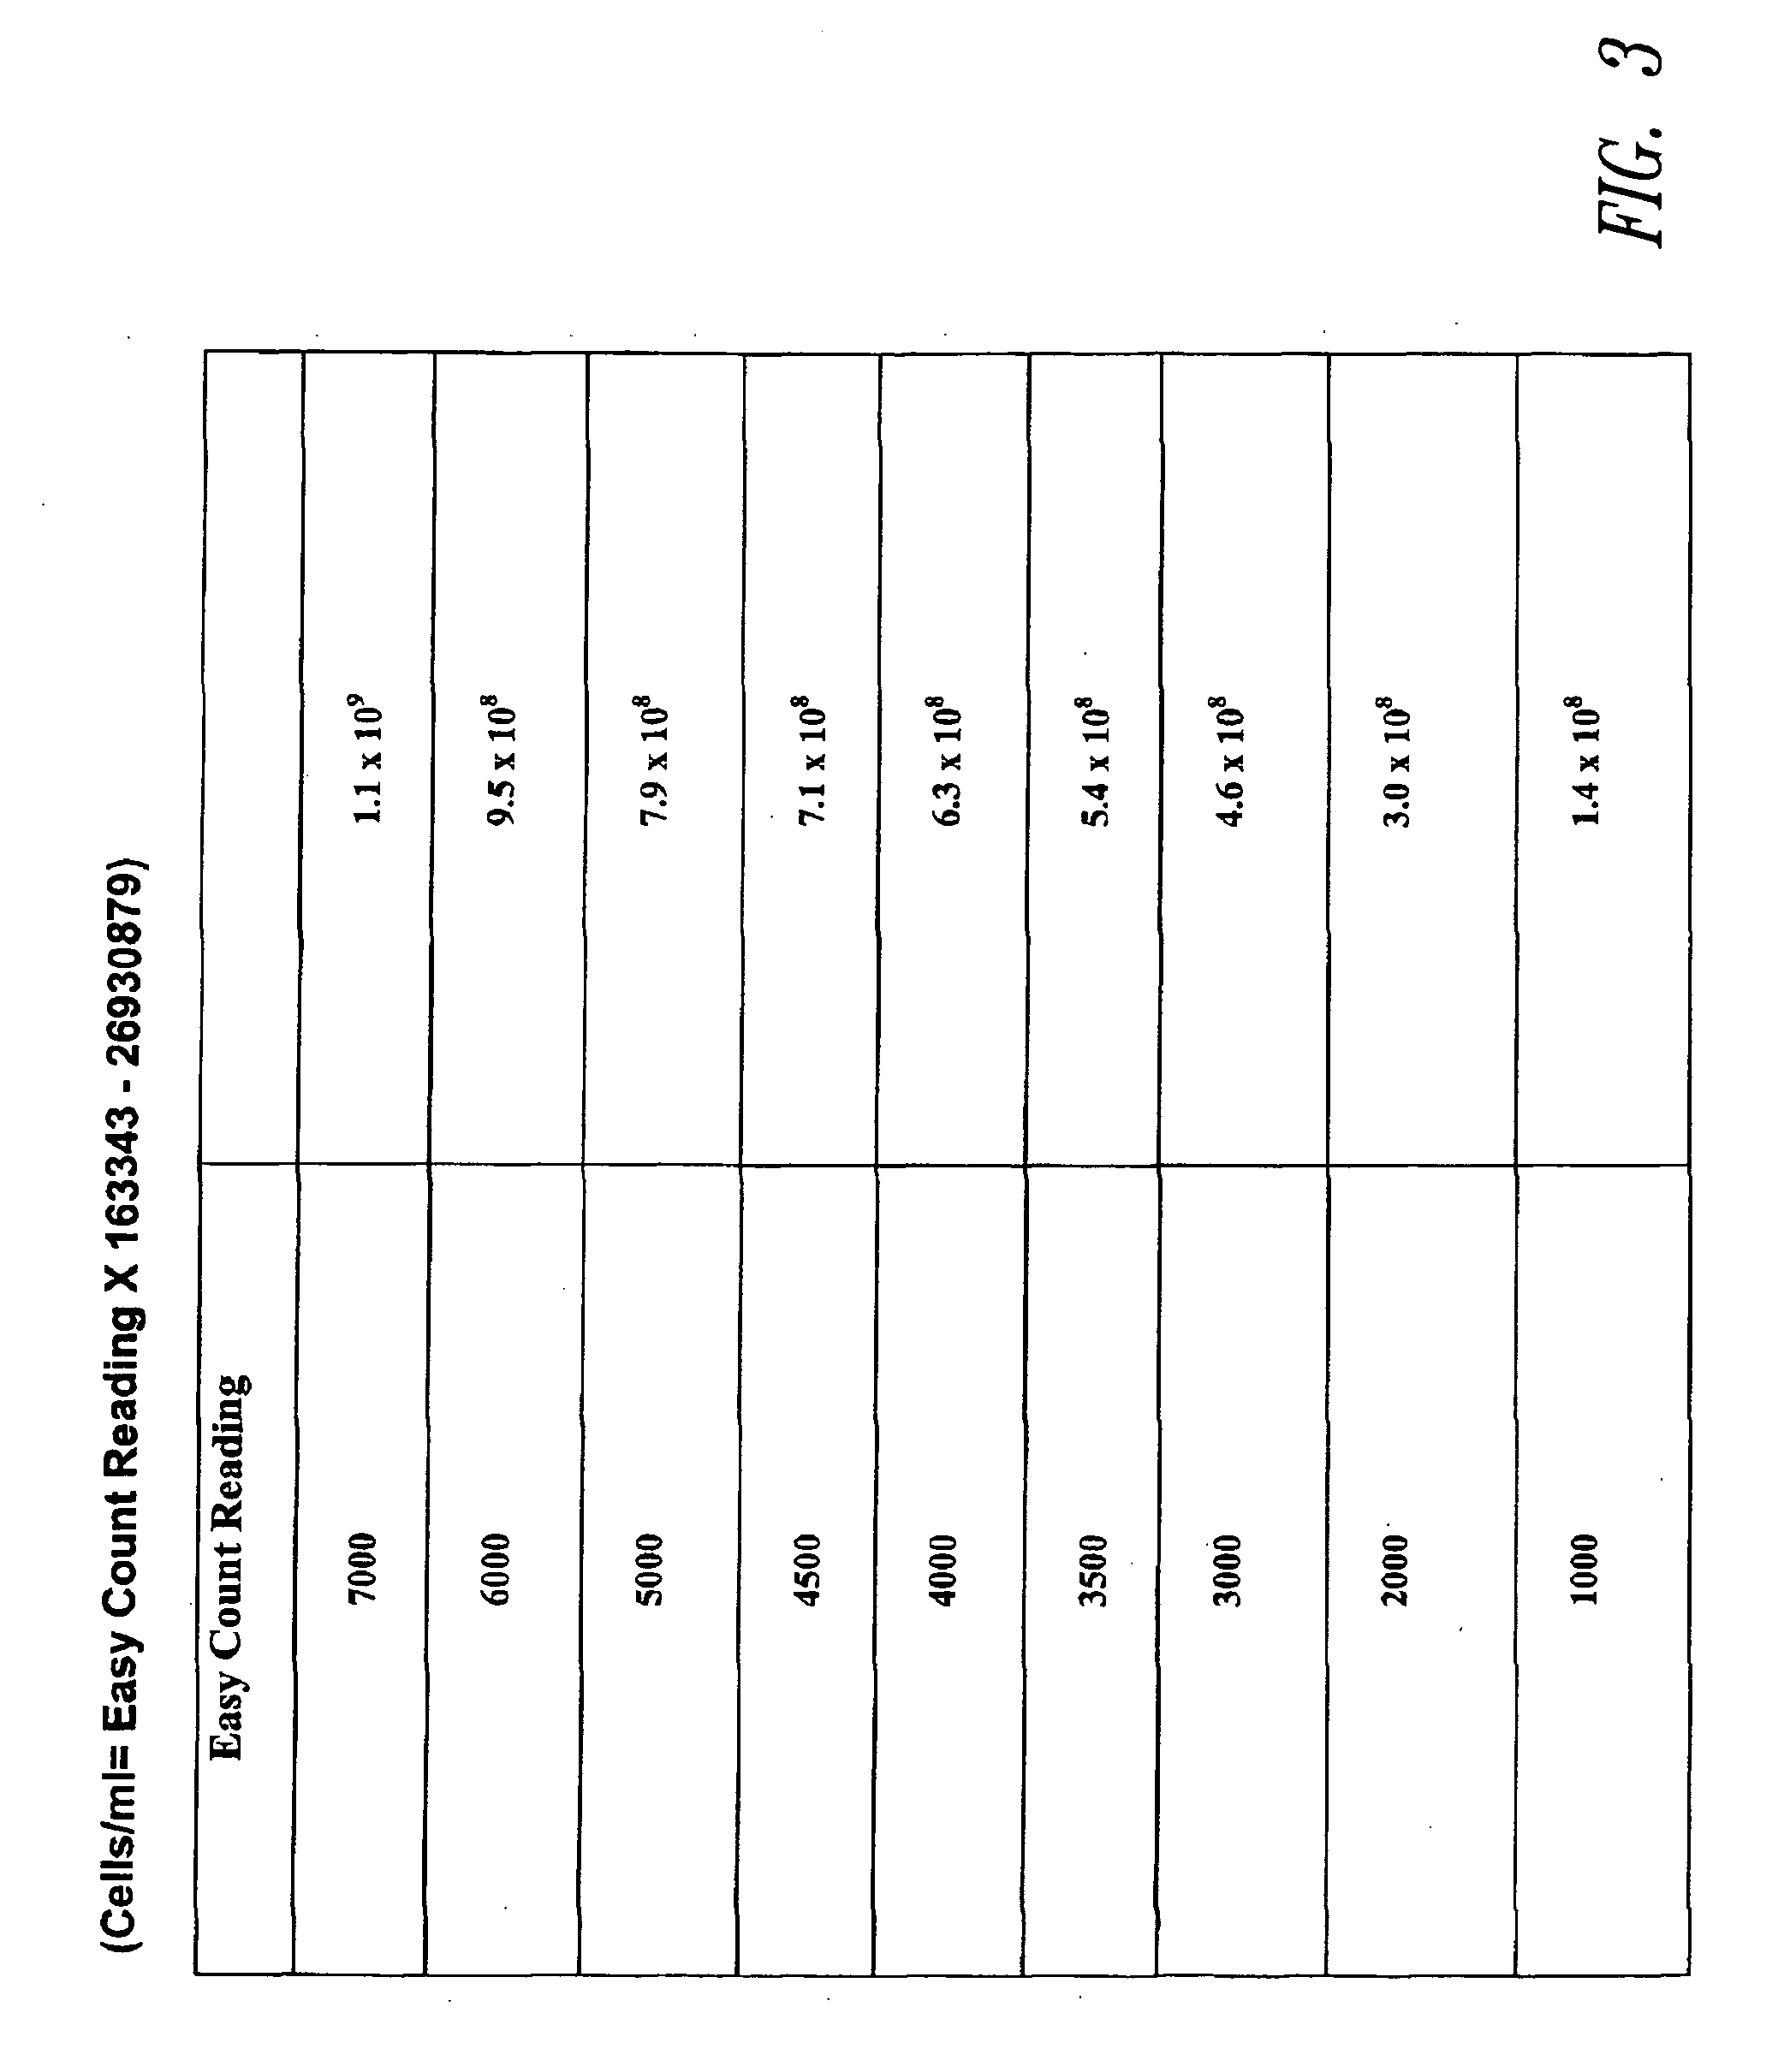 Method and apparatus for viable and nonviable prokaryotic and eukaryotic cell quantitation